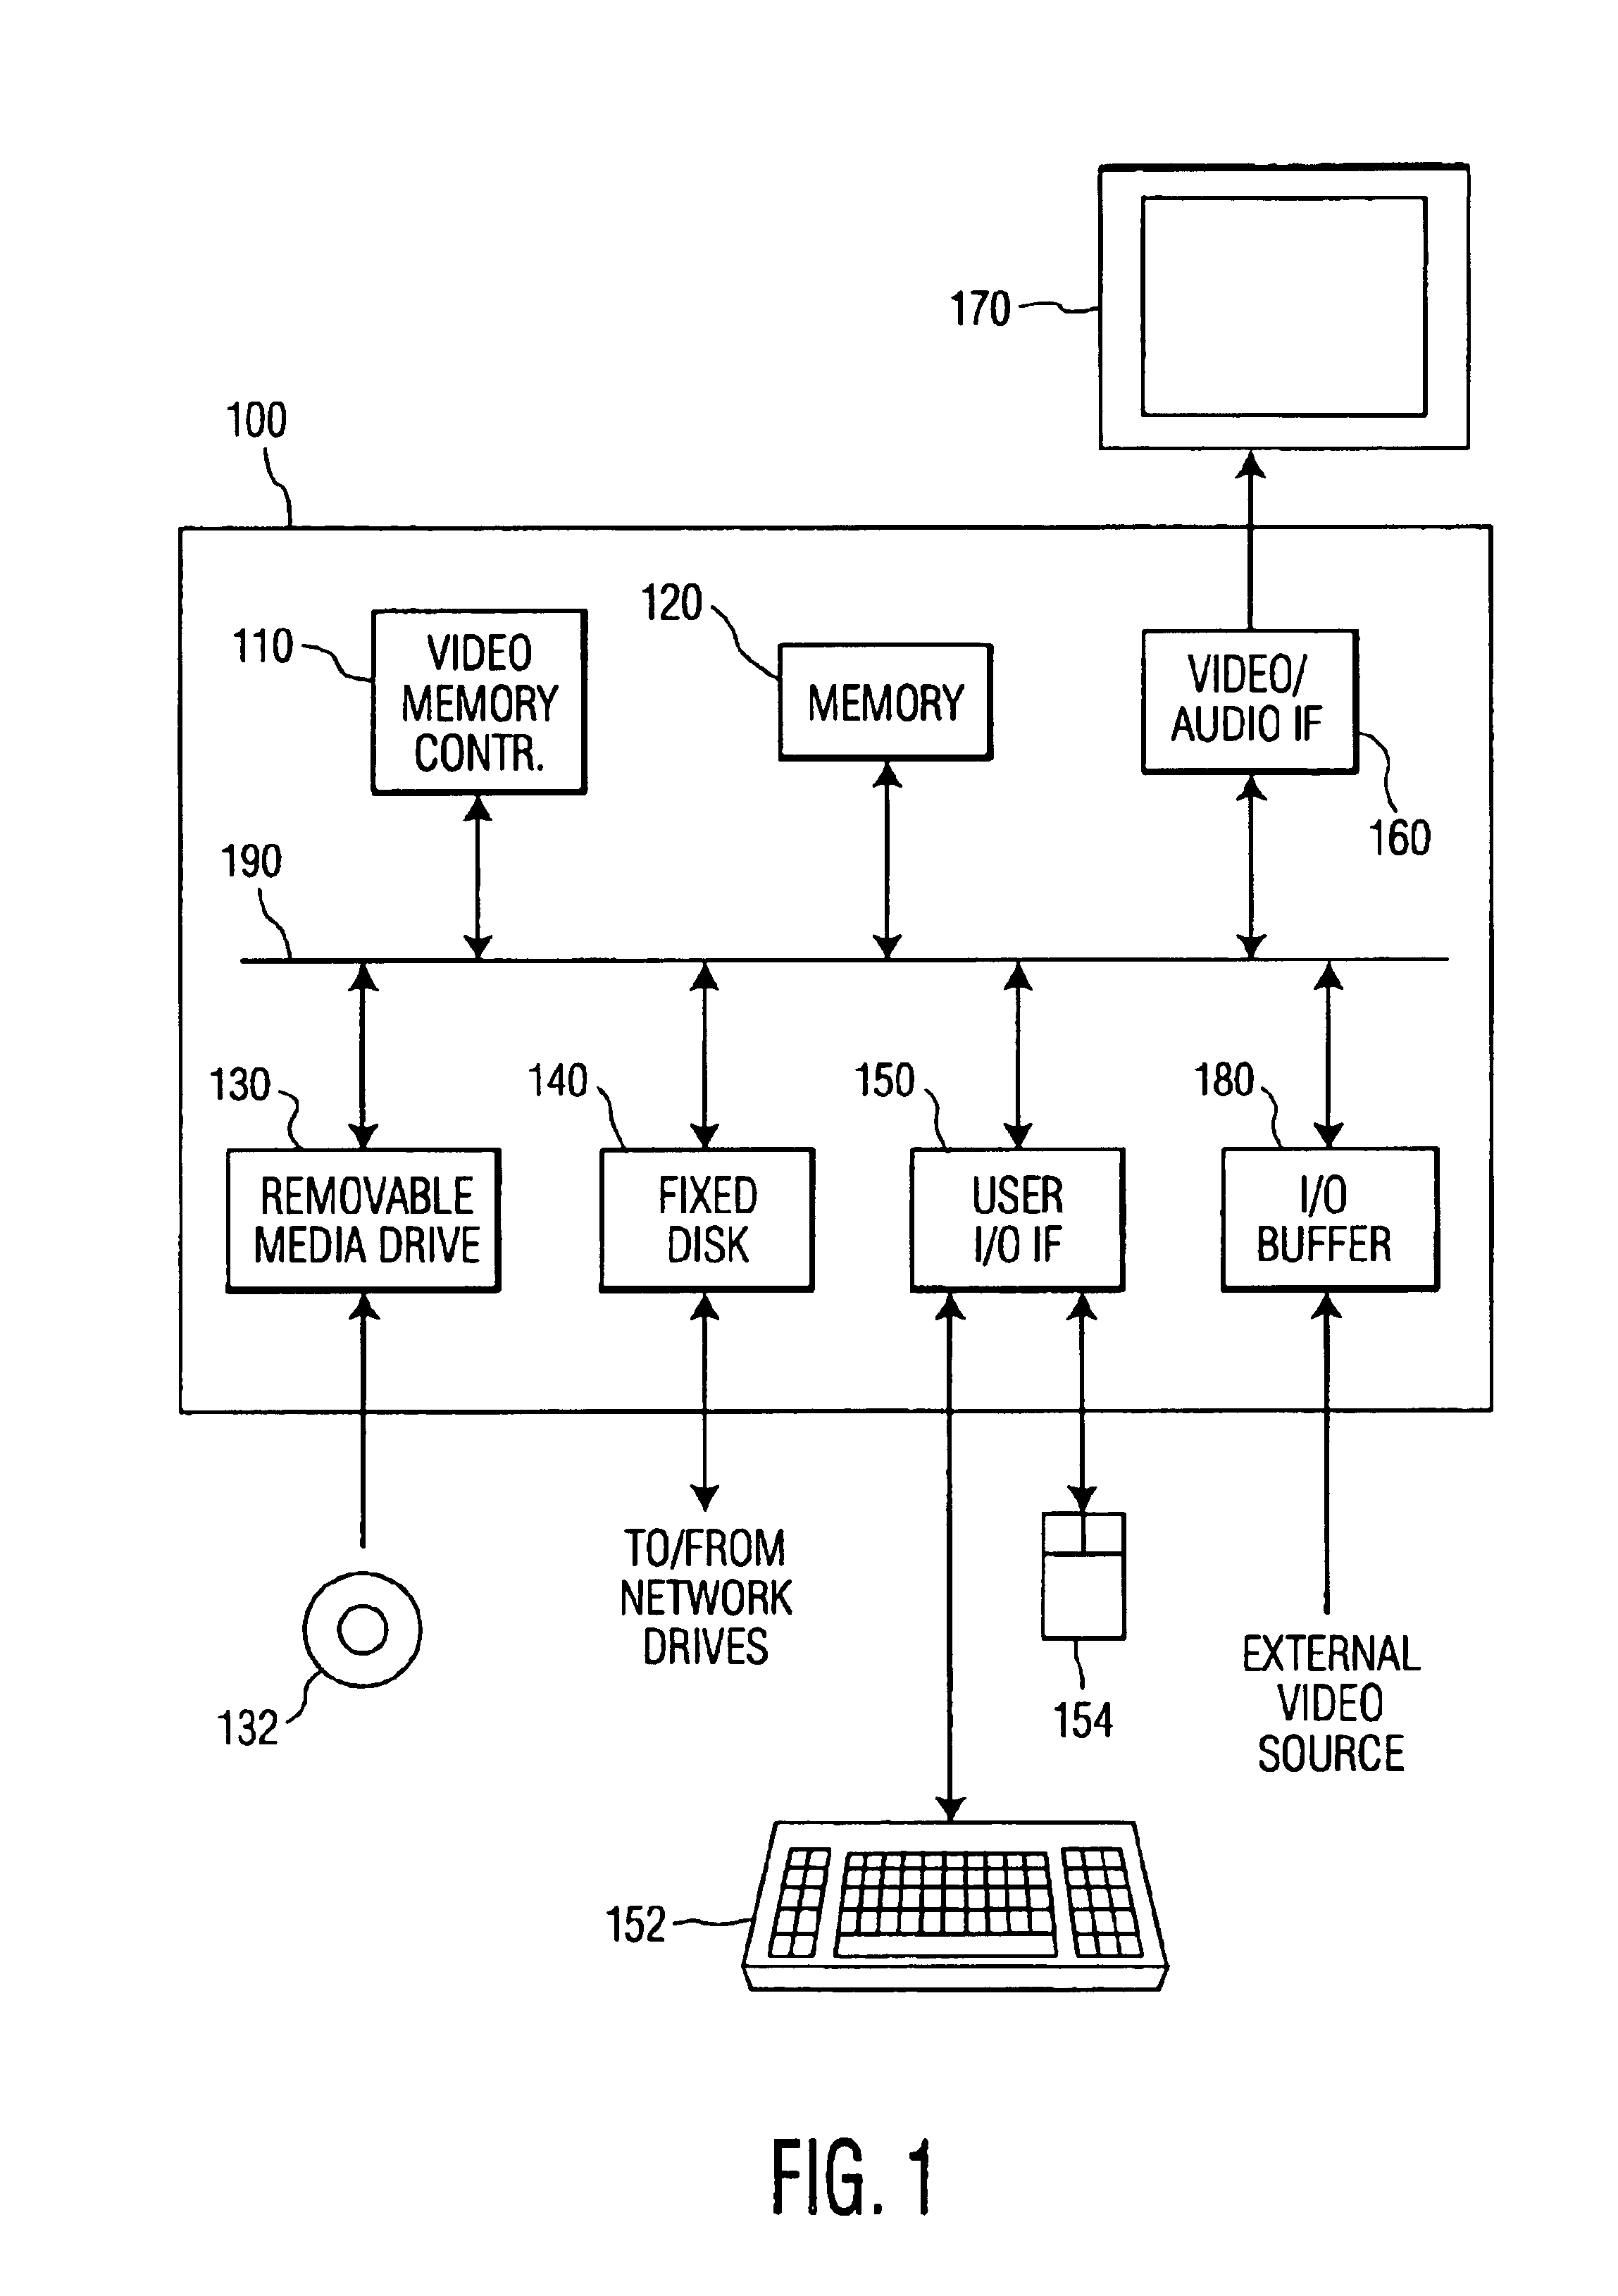 Video memory manager for use in a video recorder and method of operation